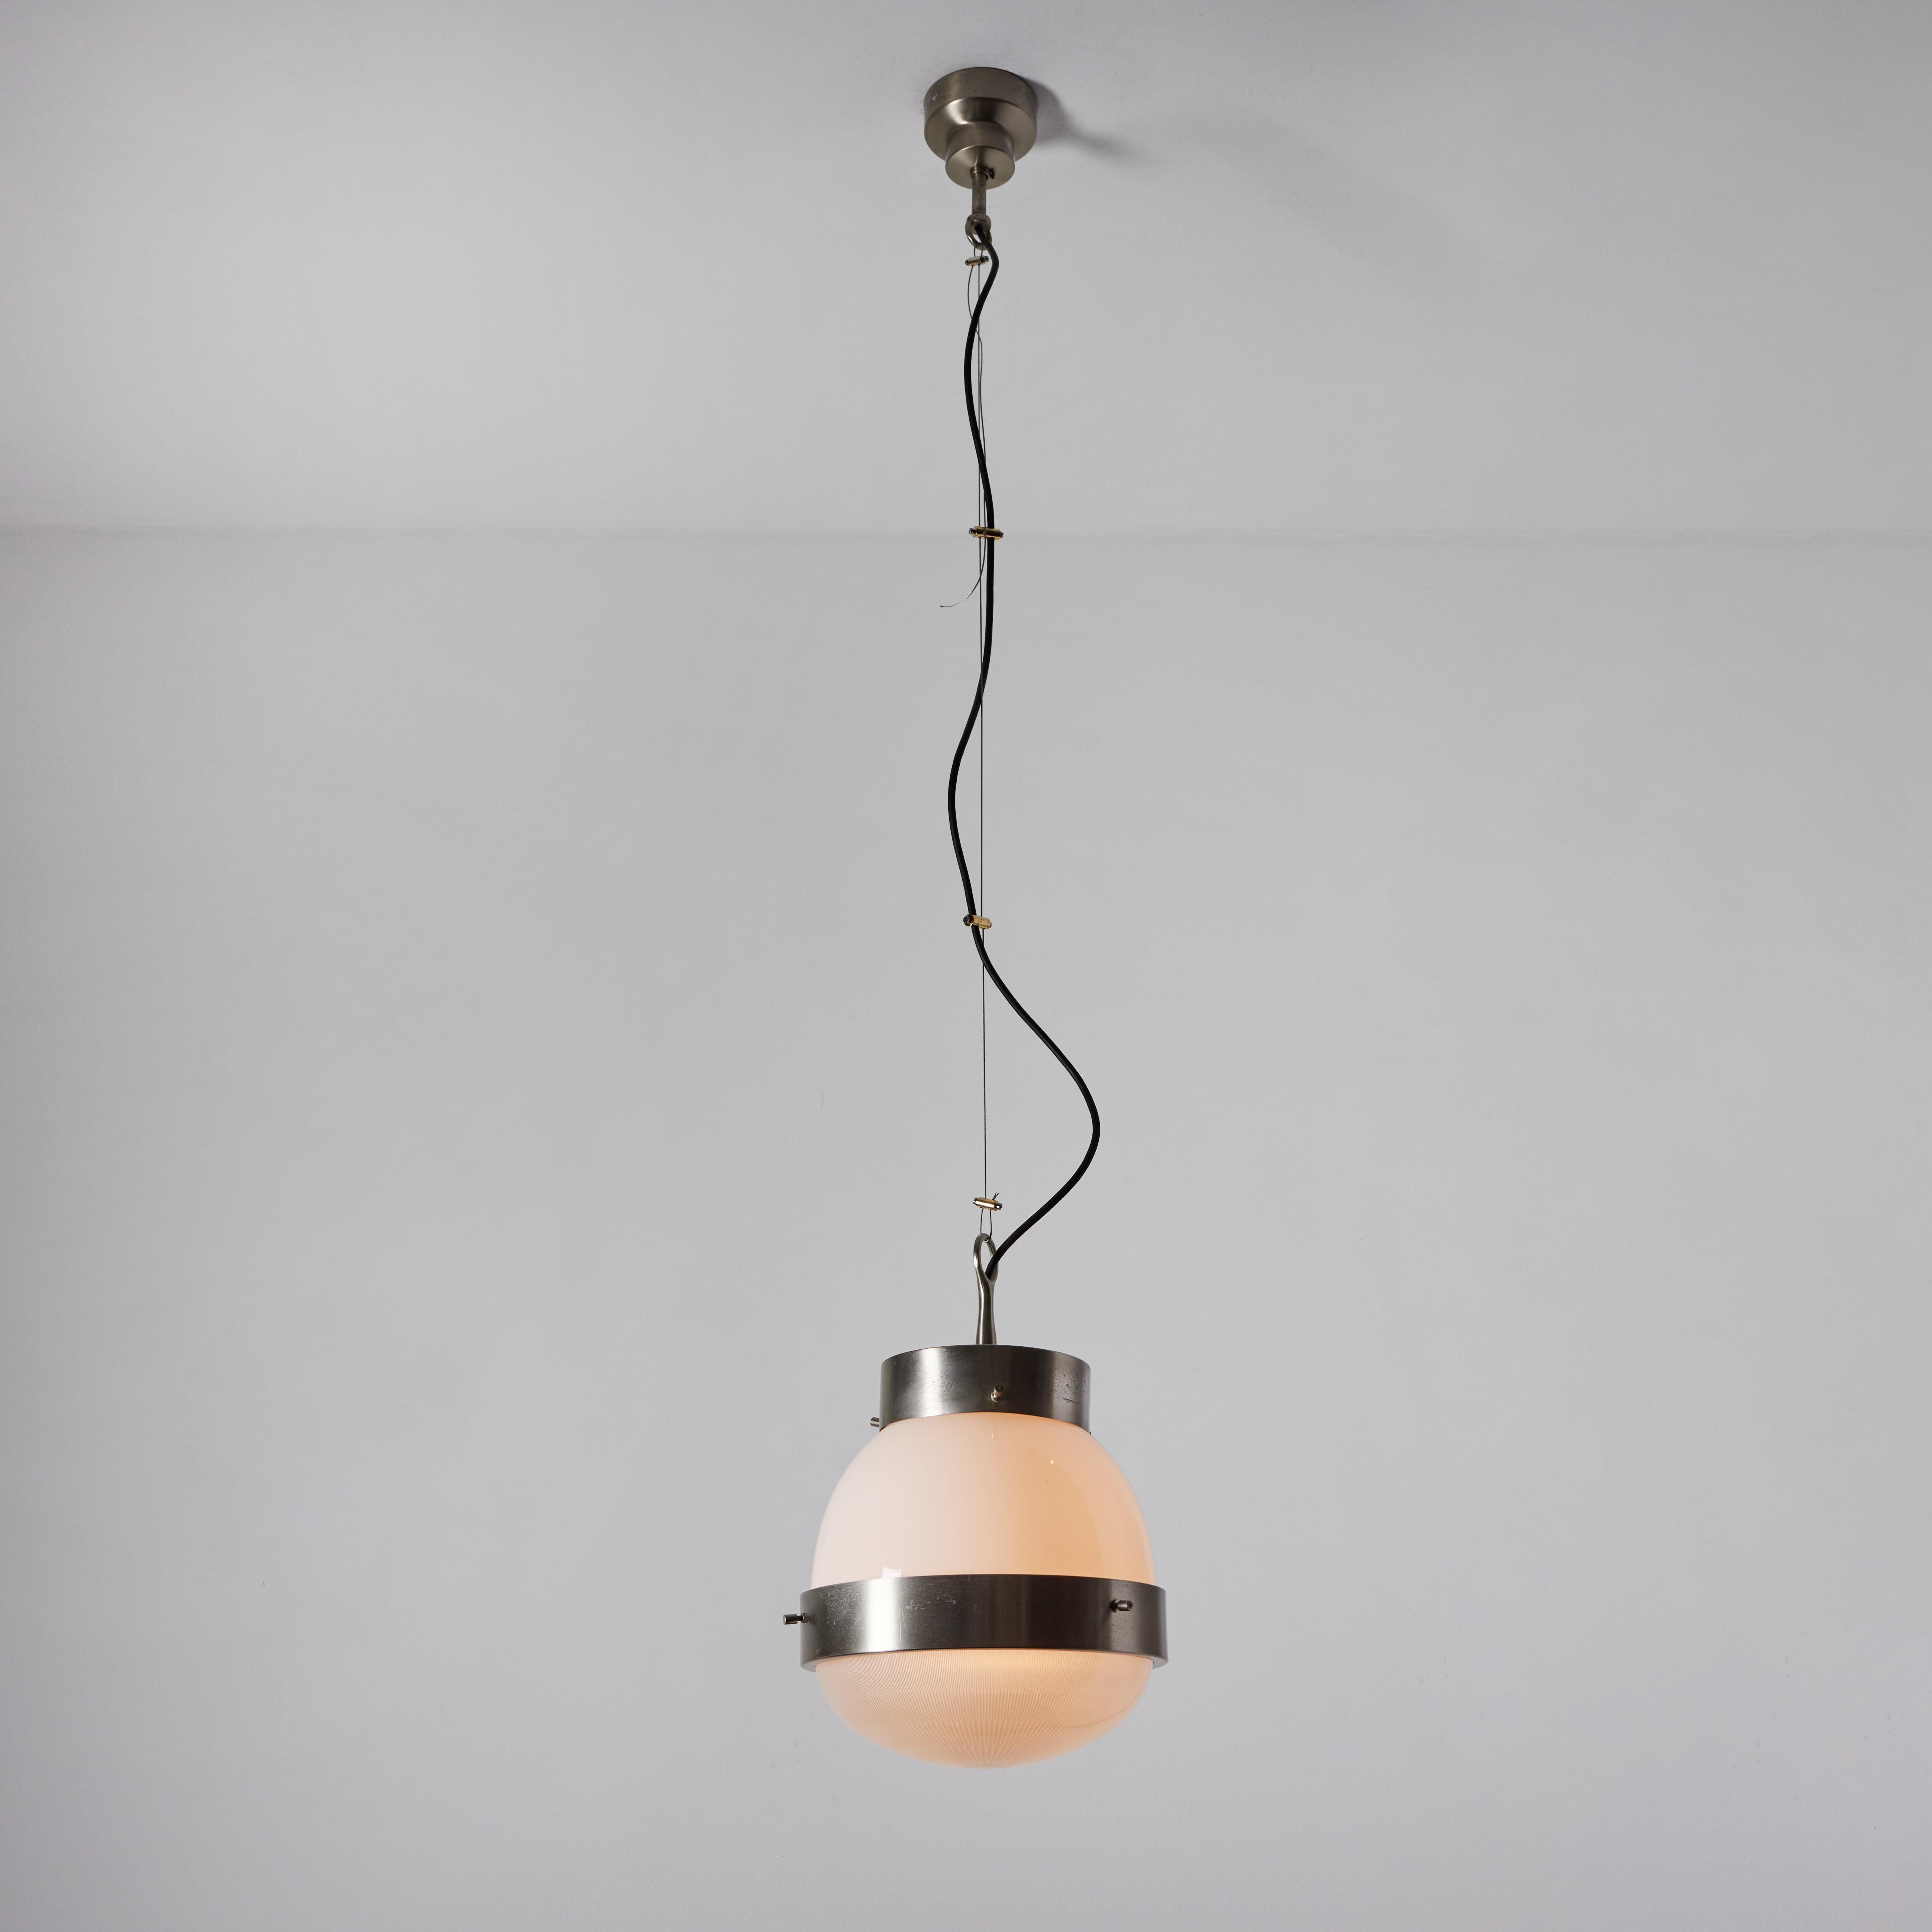 1960s Sergio Mazza 'Delta' pendant for Artmeide. Executed in nickeled brass, opaline and pressed glass. An incredibly warm and refined design from one of Italy's most illustrious midcentury icons. 

Born in Italy in 1931, Sergio Mazza created